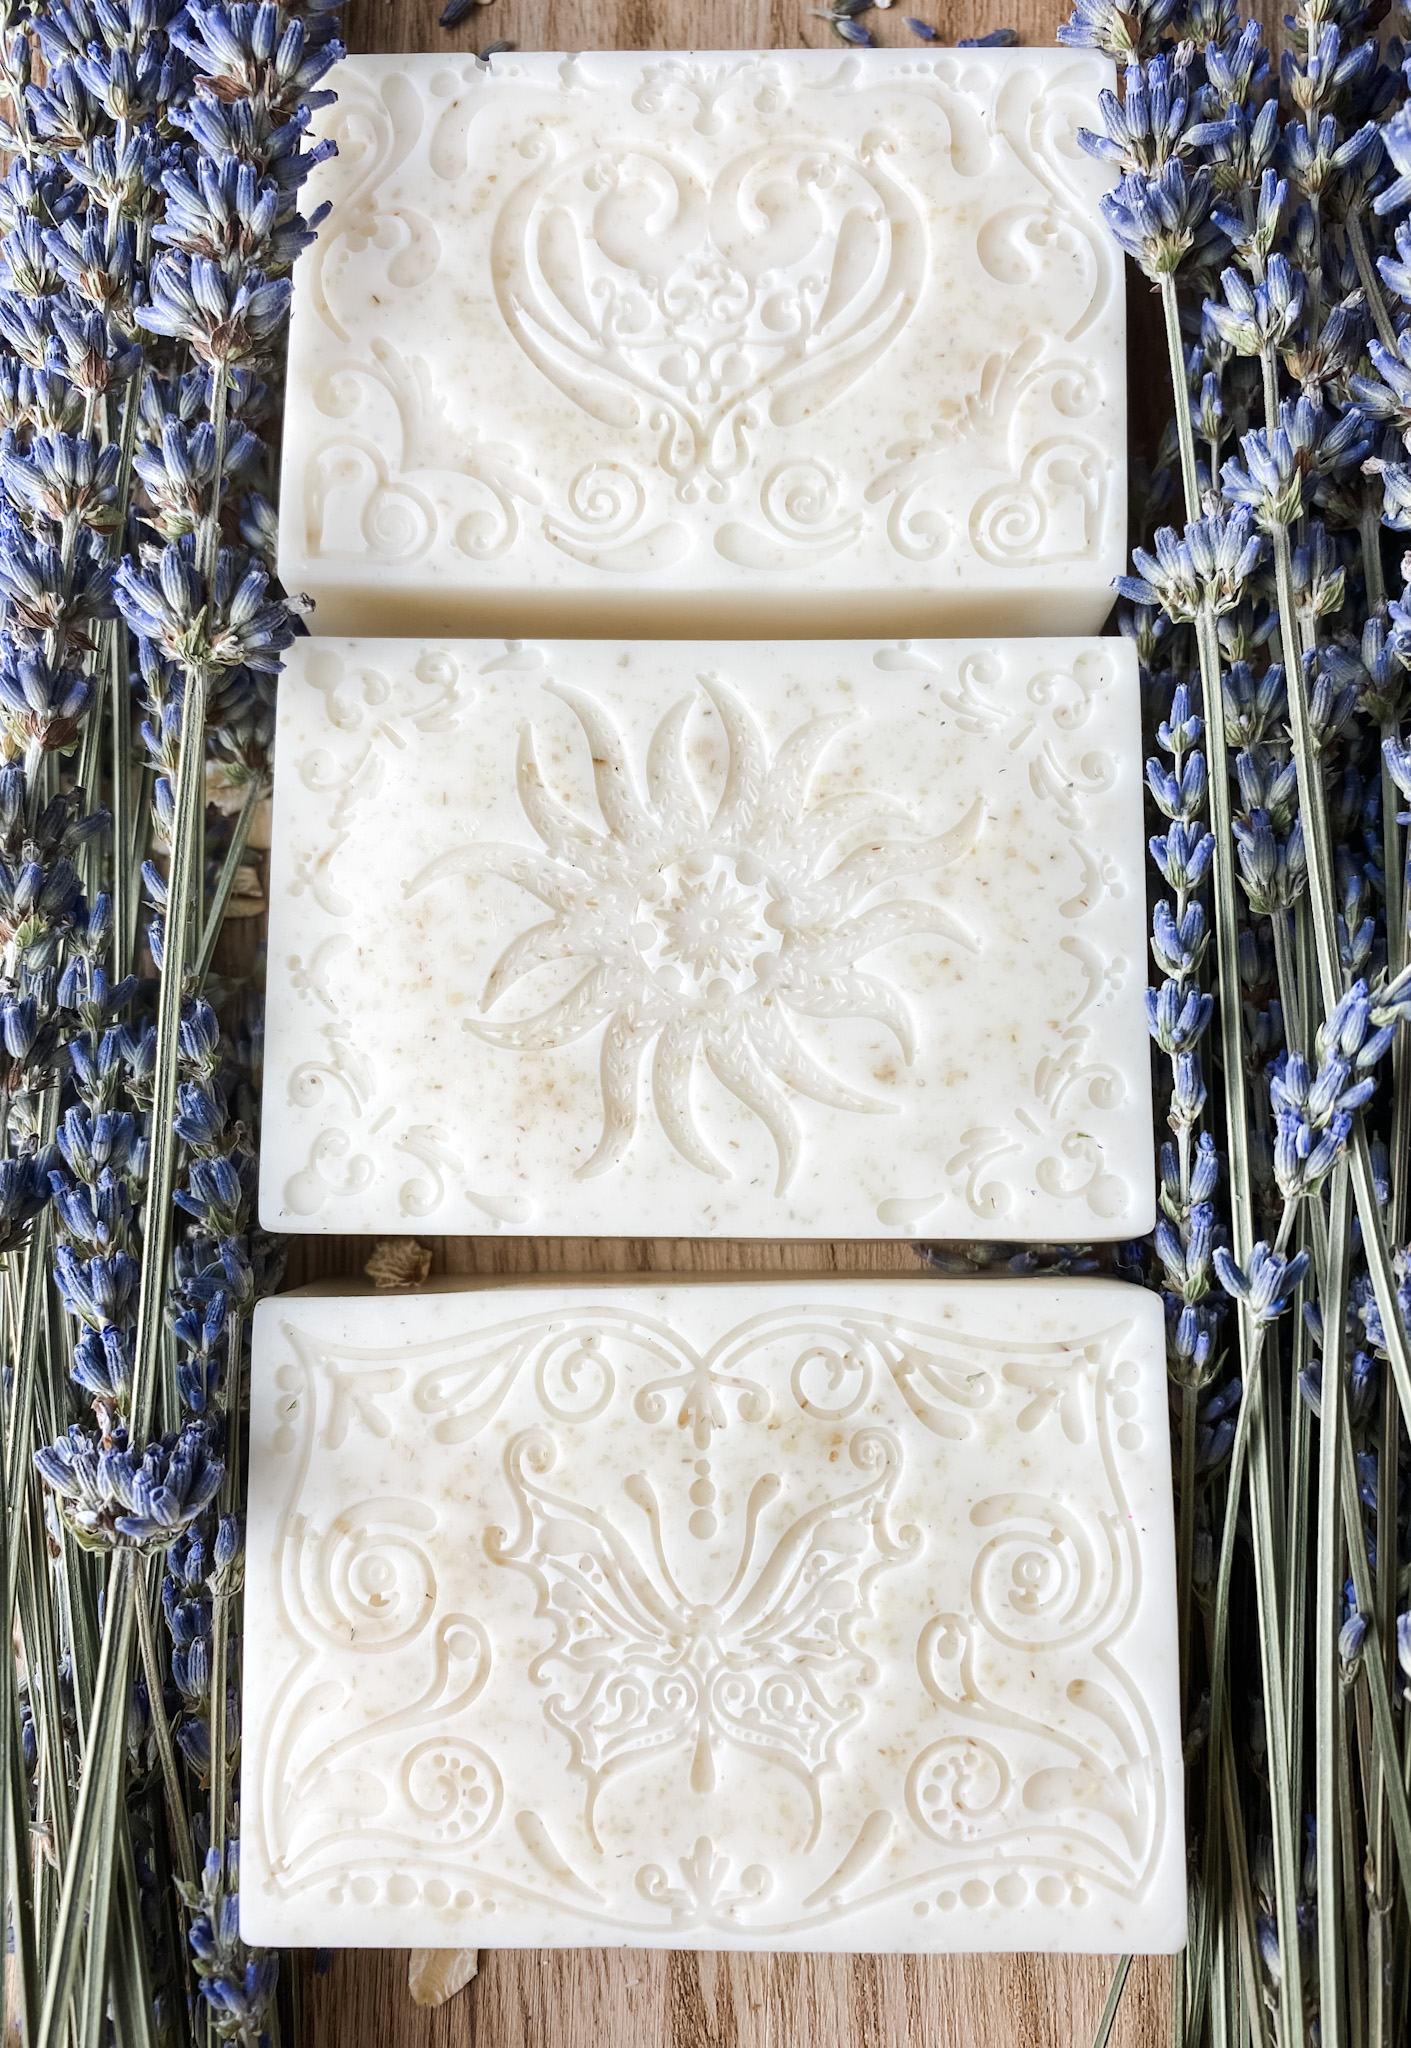 goat milk soaps 3 with motive melt and pour soaps